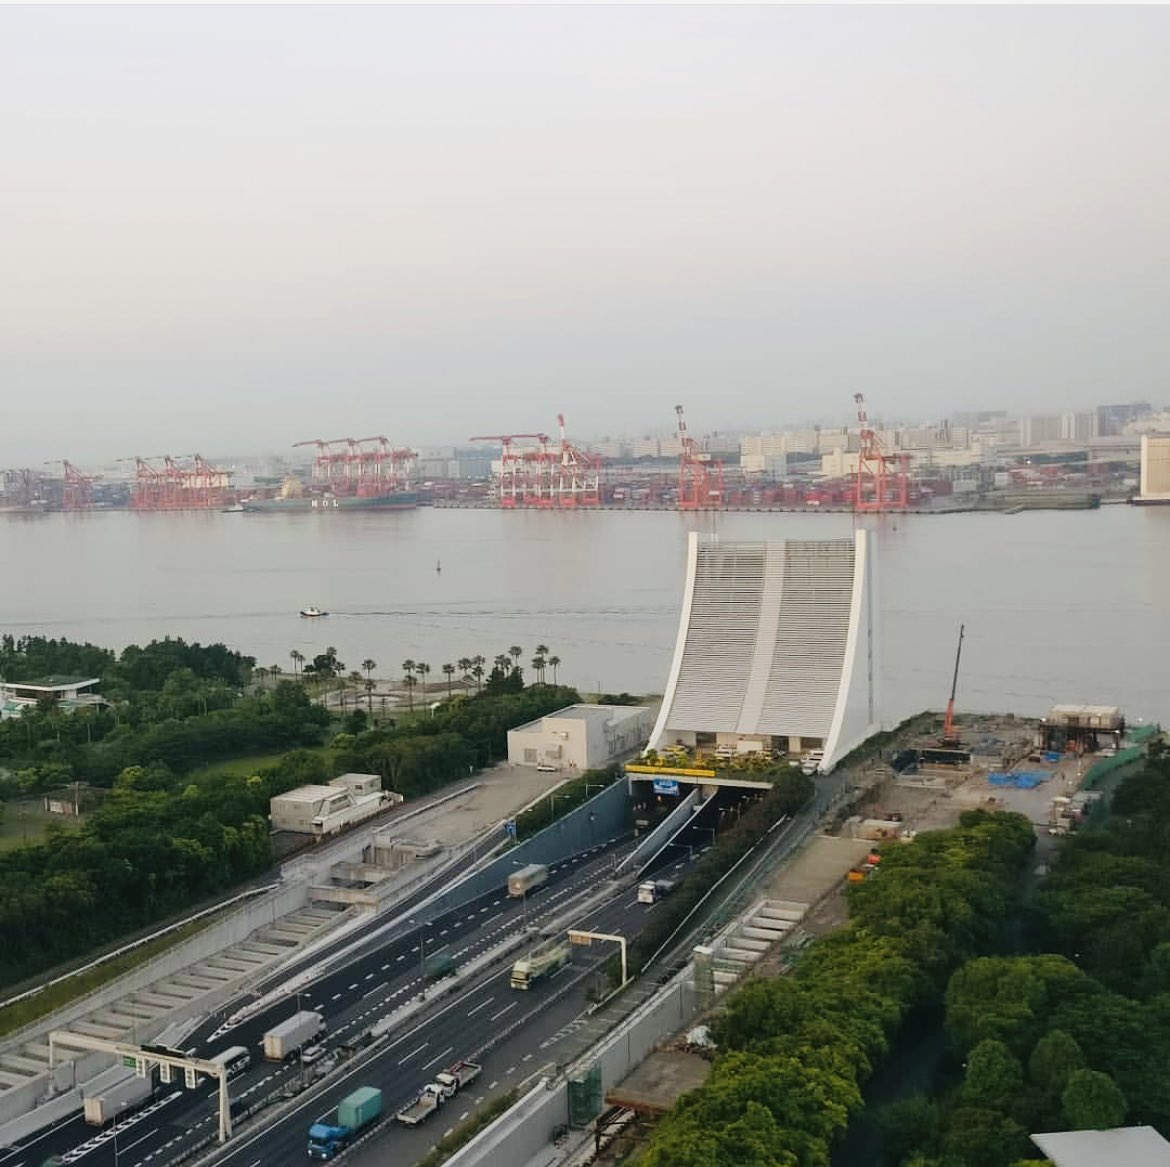 Share an intriguing travel photo taken through a window - from a train, bus, plane or hotel window. A view from the #GrandNikkoTokyoDaiba hotel of the spectacular Tokyo Bay. #Japan